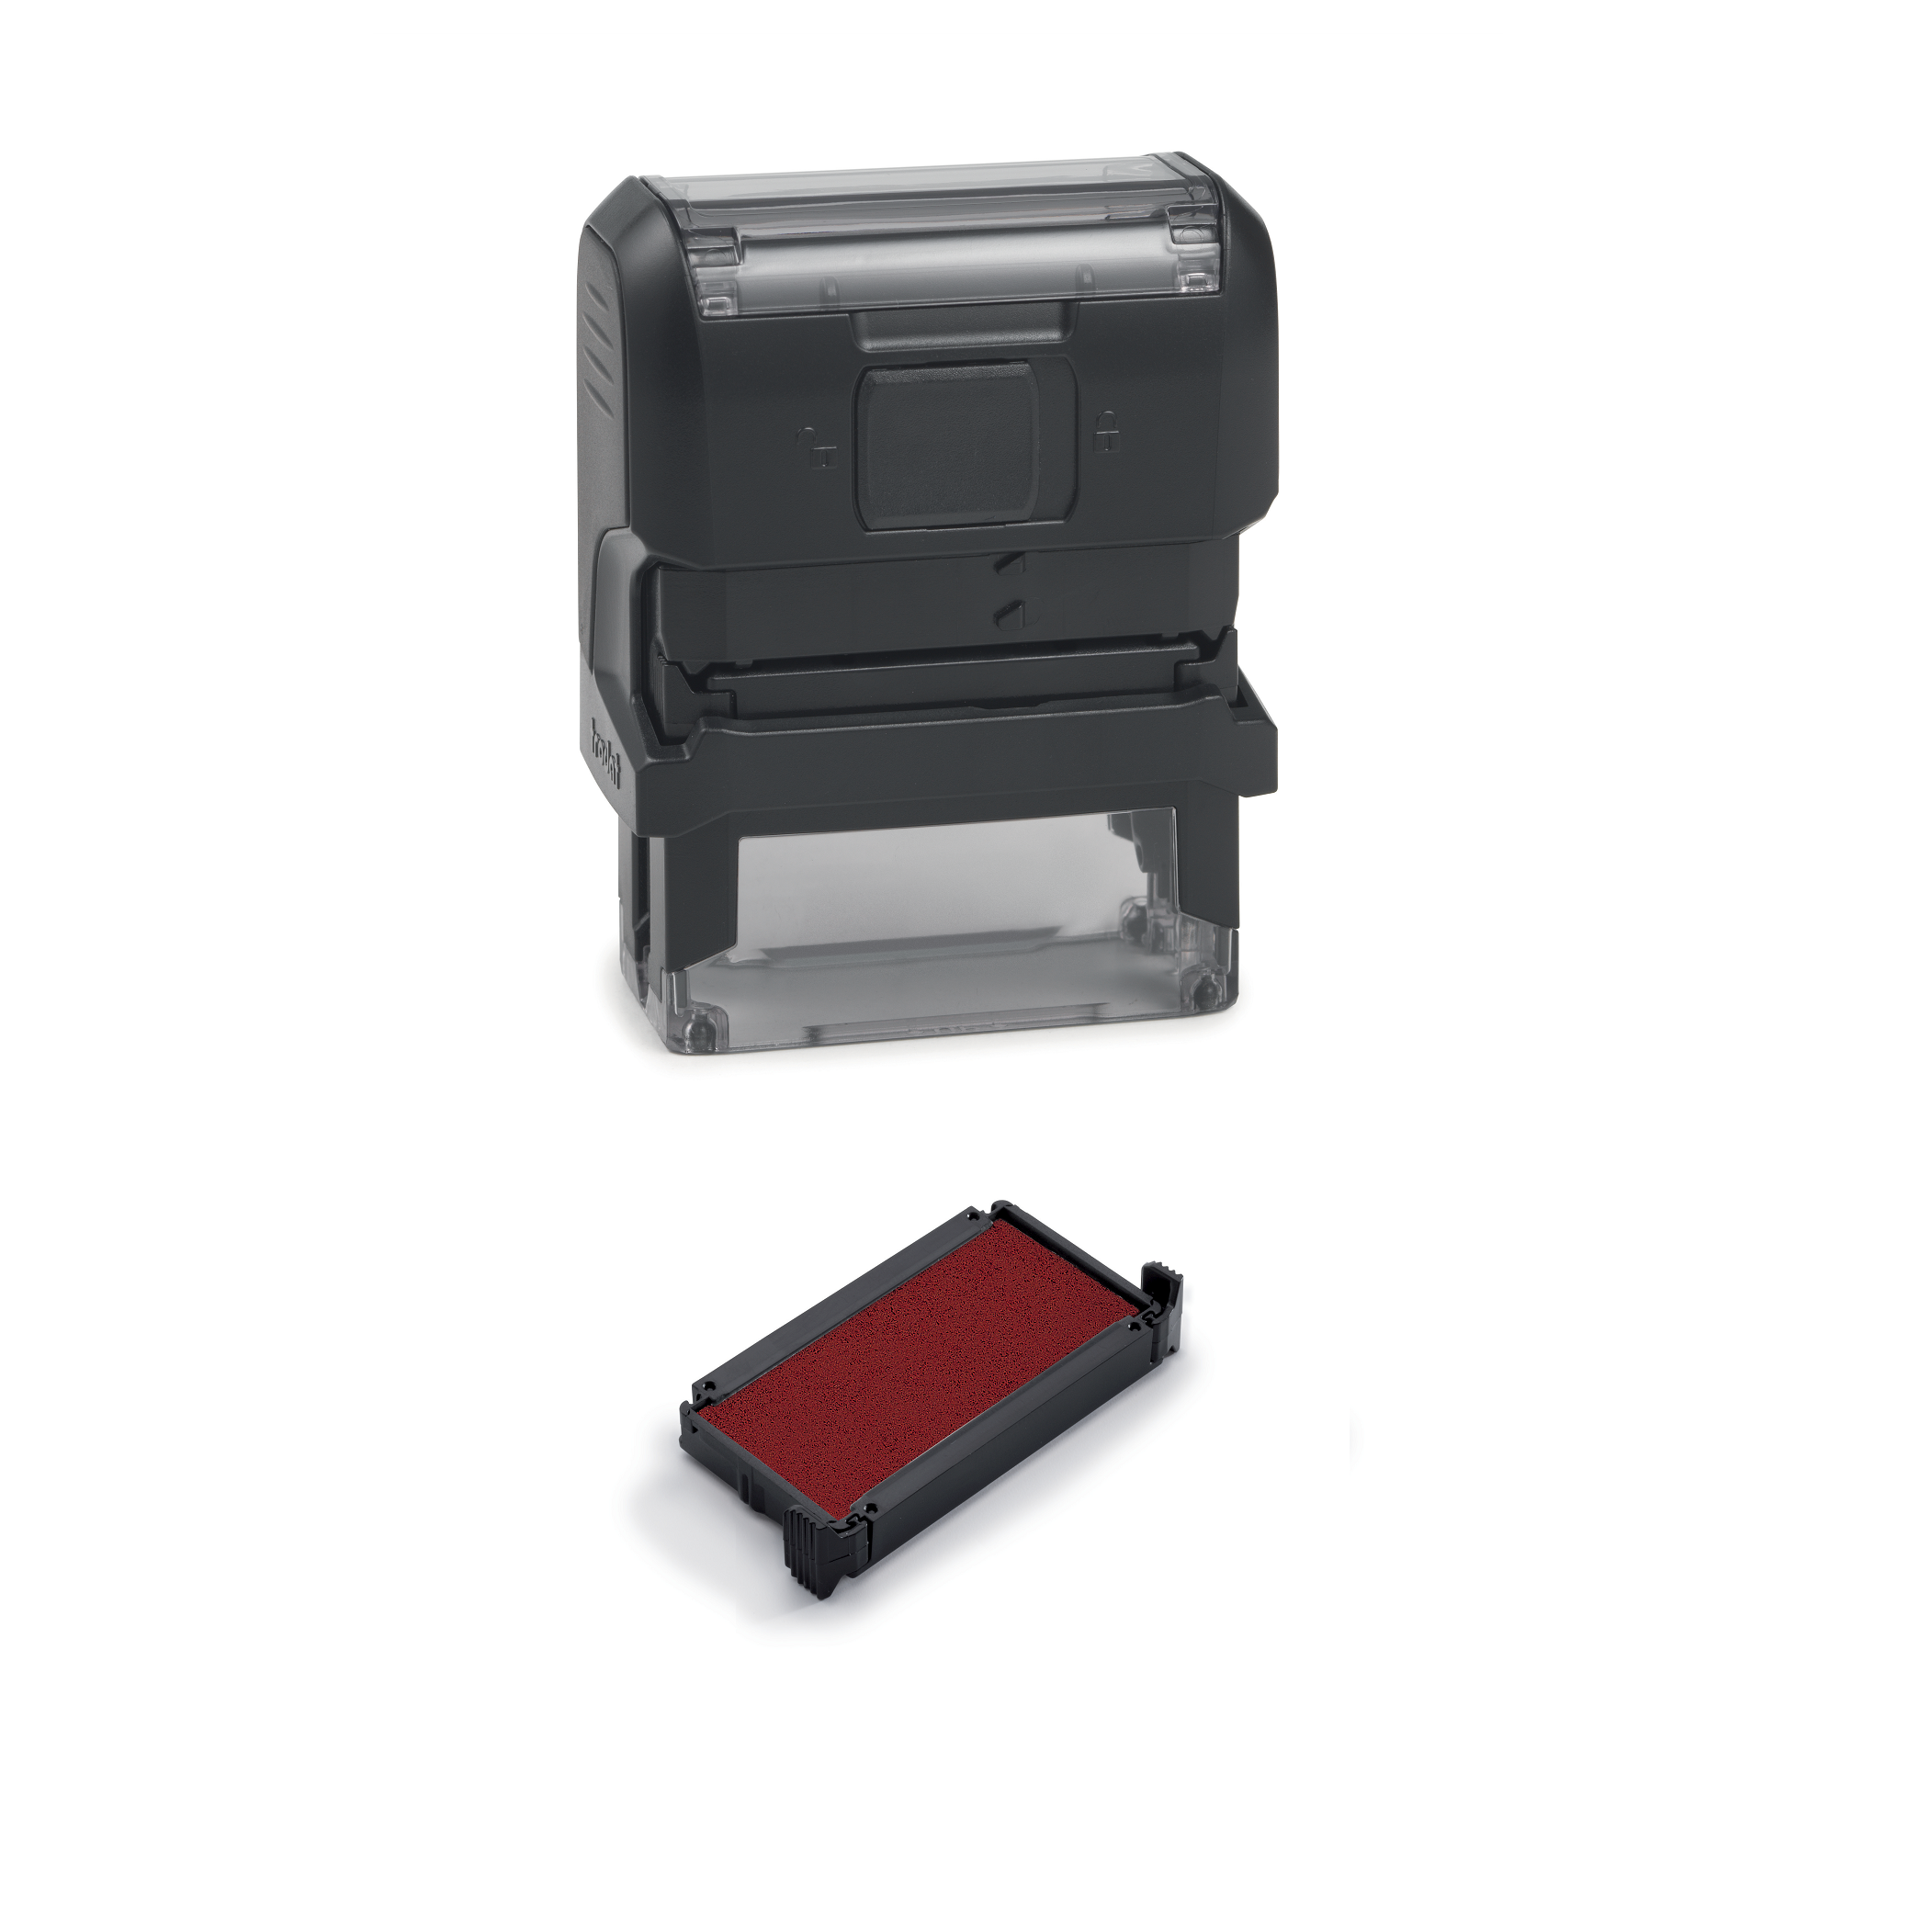 Urgent Message Your Account is Now Overdue and Requires Immediate Payment Office Self Inking Rubber Stamp (SH-5977)